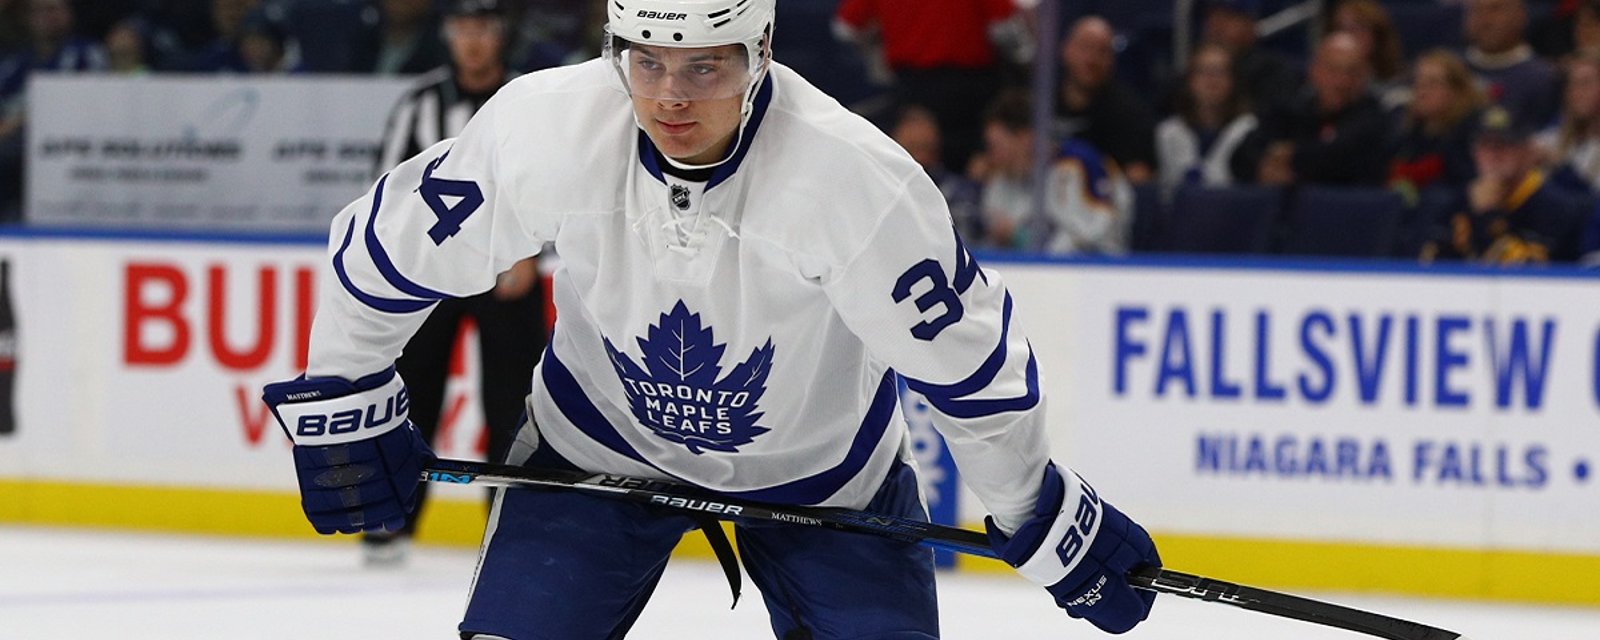 Auston Matthews reveals which NHL player inspired him, and the answer may surprise you.